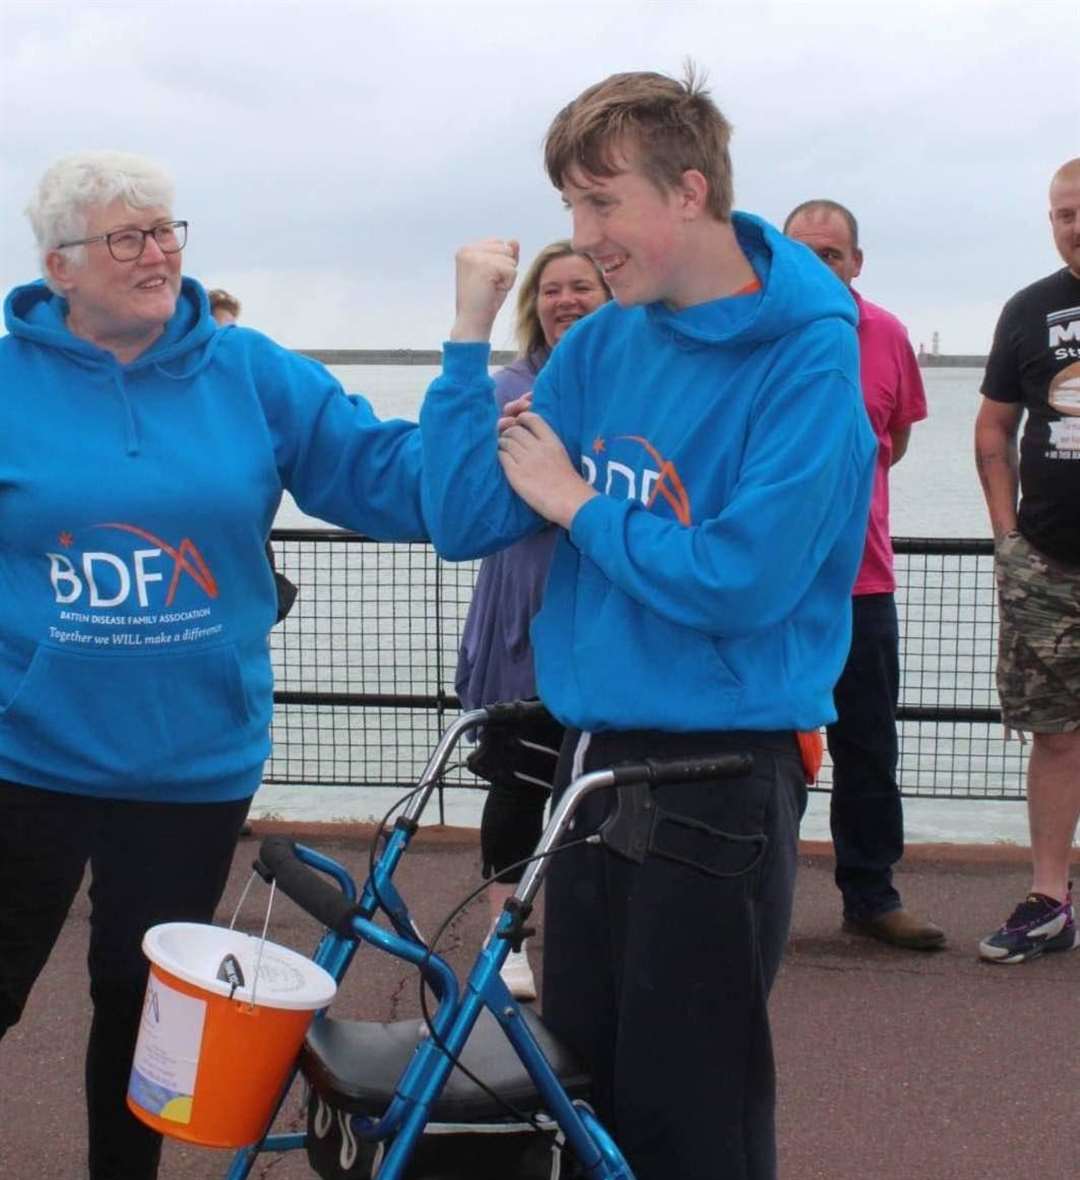 A delighted Ryan, 14, celebrates completing his 50-mile challenge in aid of BDFA